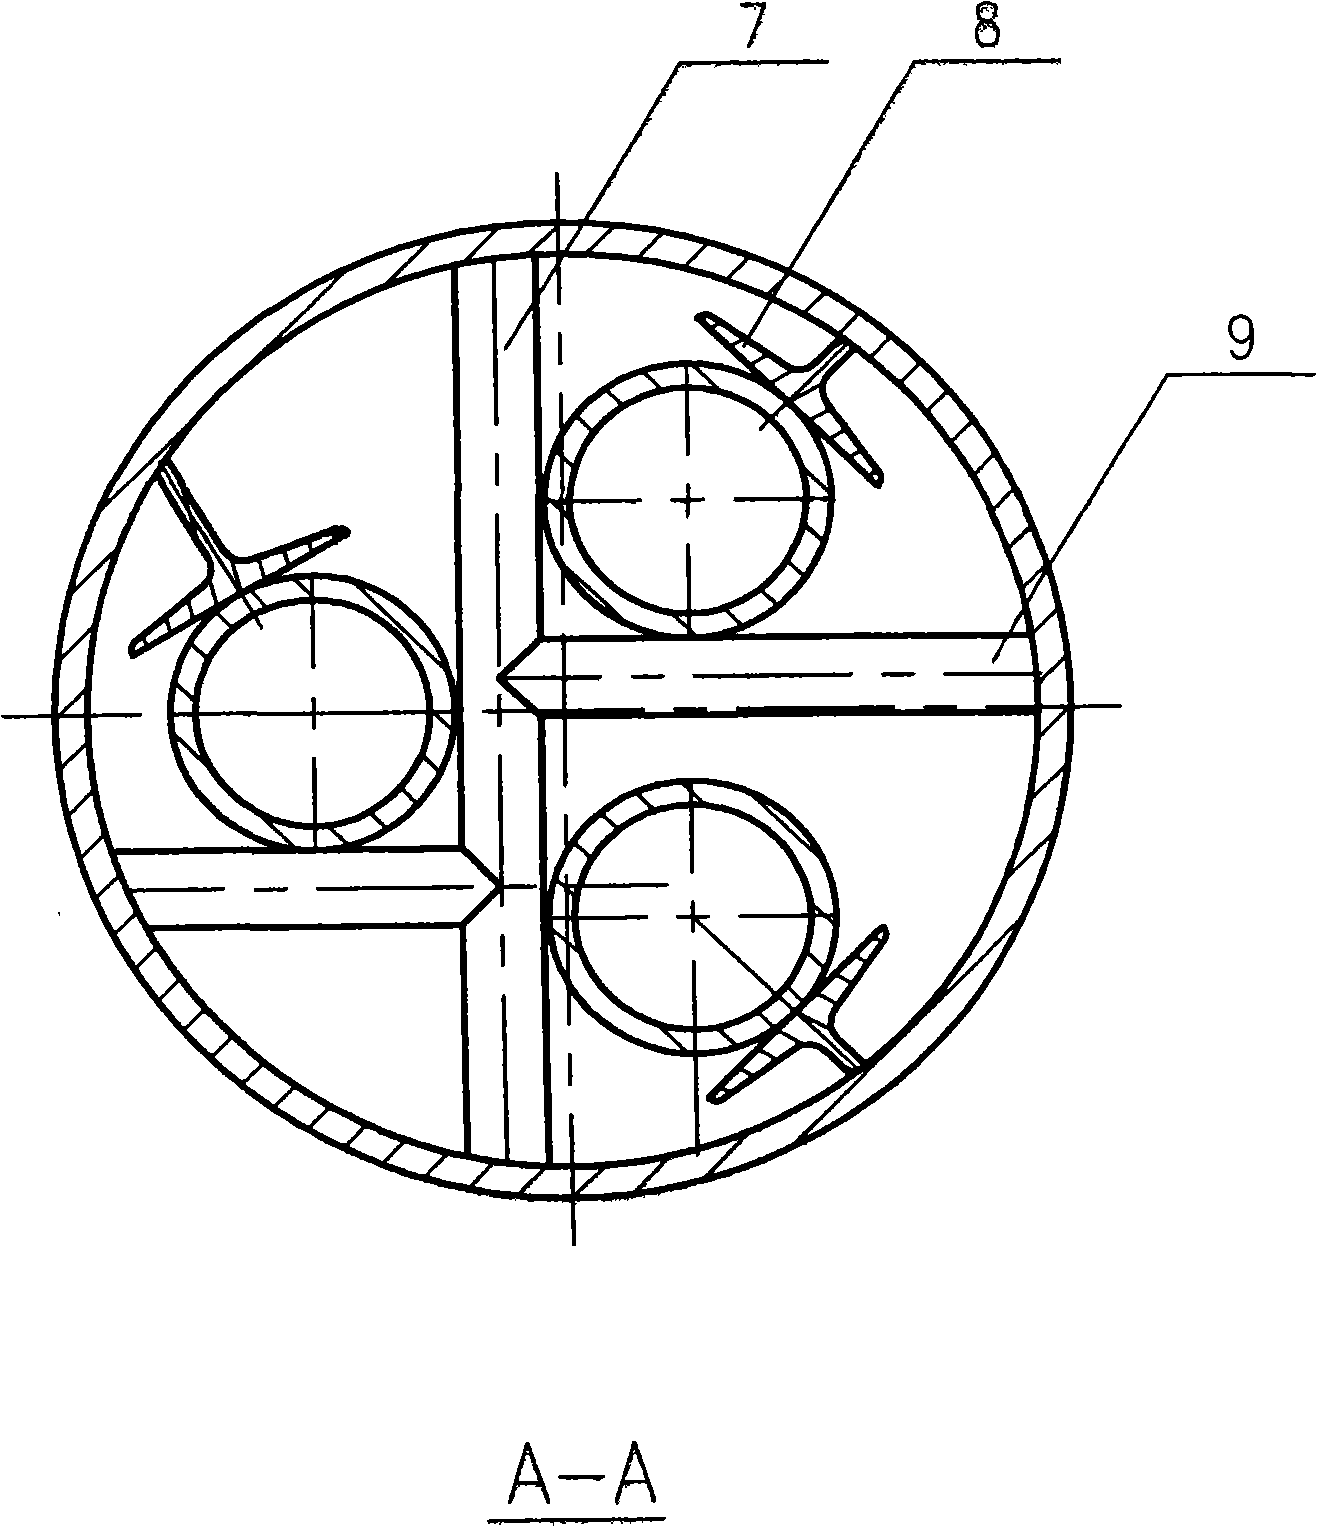 Star shaped casing tube preheater for large-scale canalization dissolving out apparatus